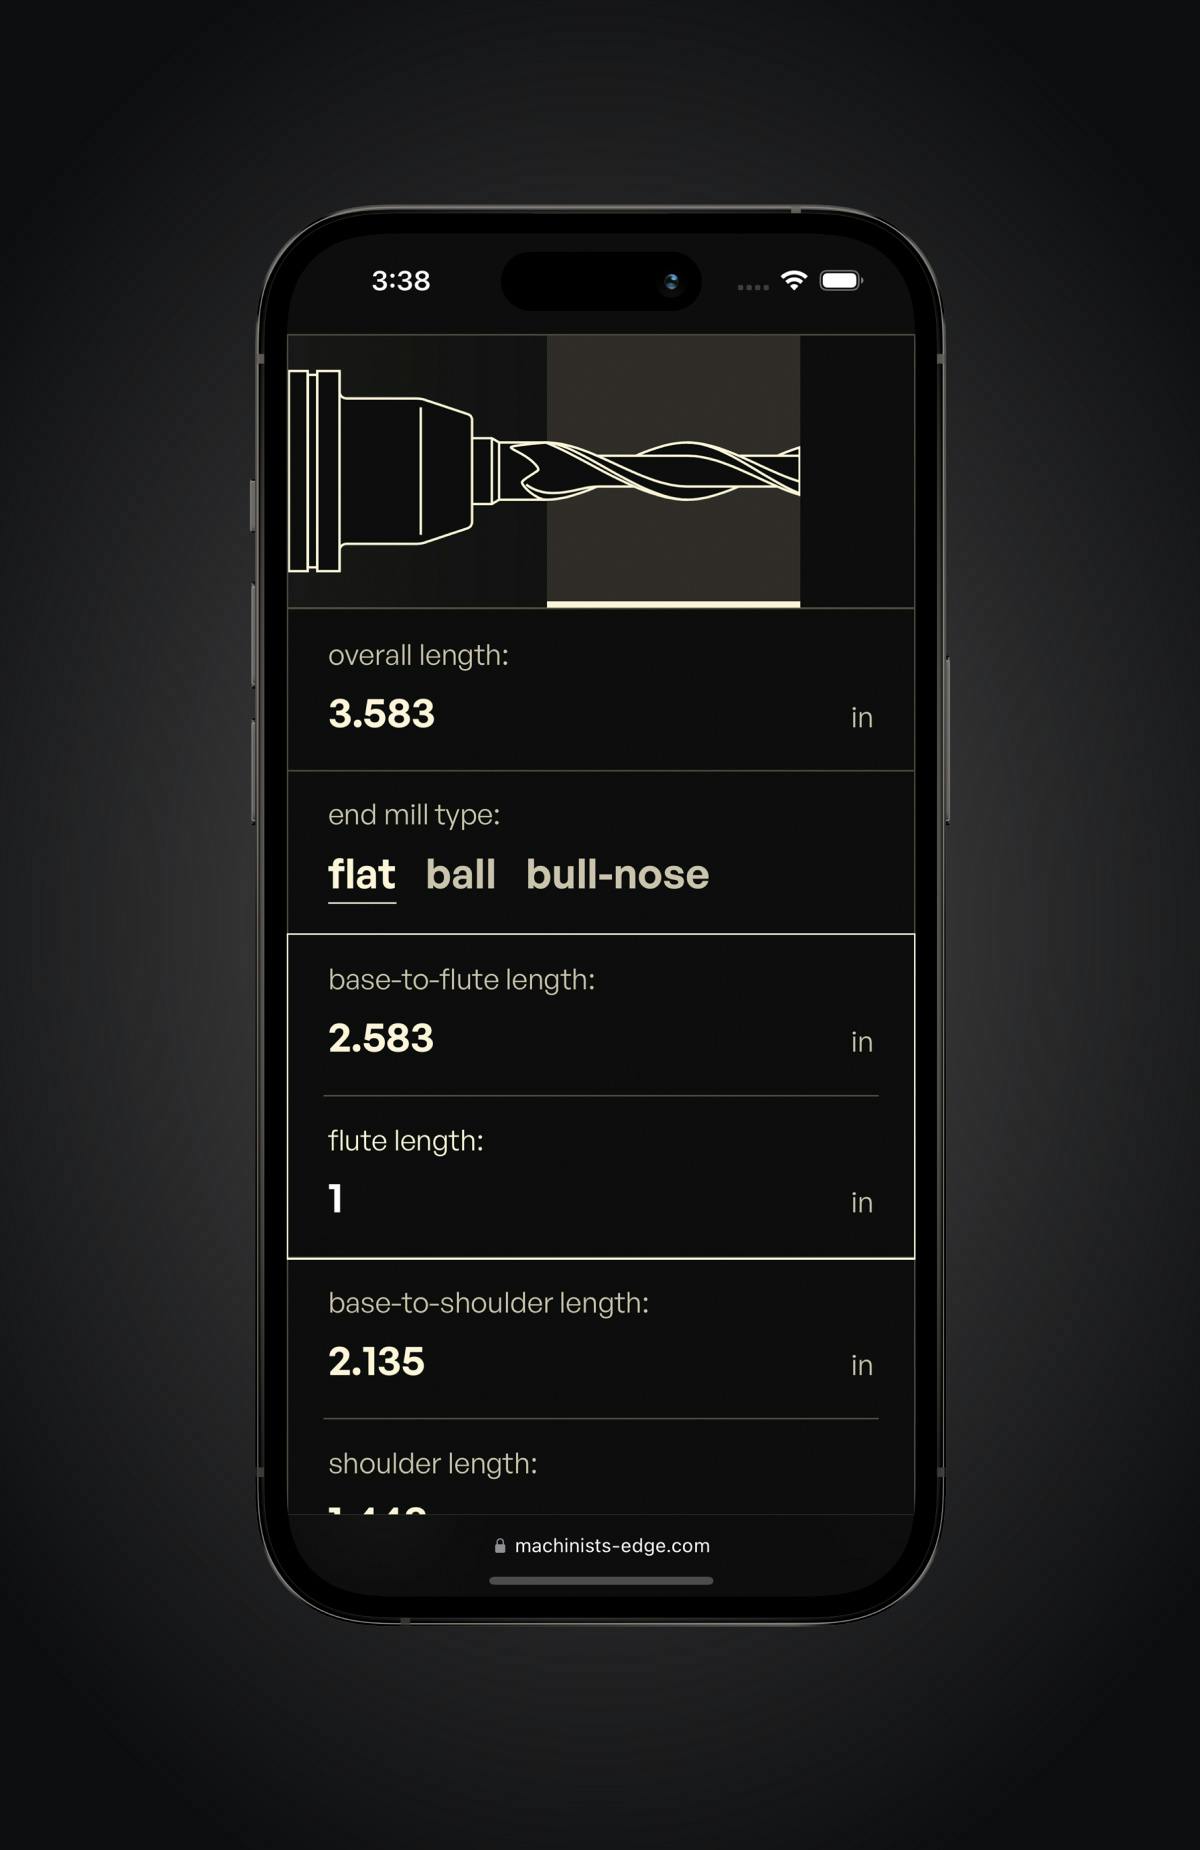 The tool length calculator page displayed on an iPhone 14 Pro in dark mode.